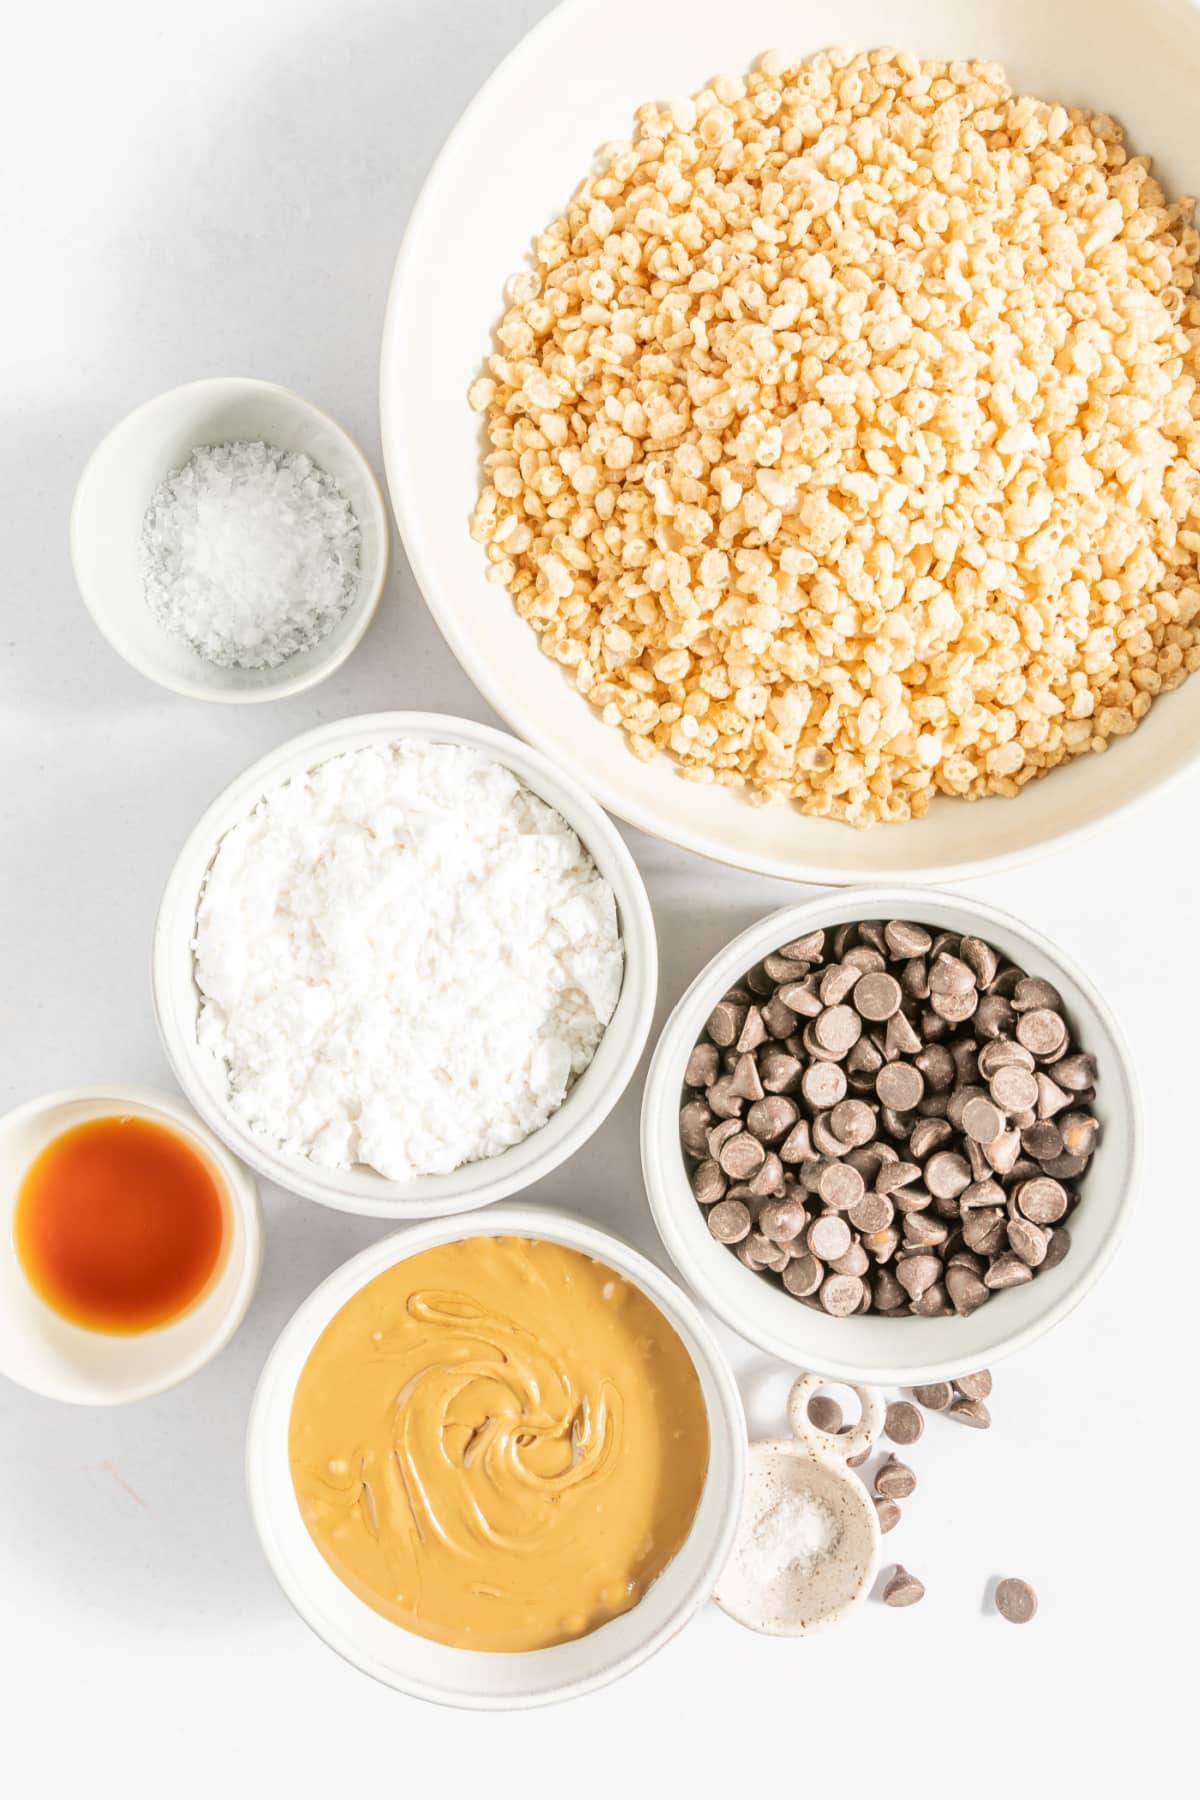 the ingredients for butterfinger balls measured out in separate bowls, ready to make: crispy rice cereal, chocolate chips, powdered sugar, peanut butter, vanilla extract, flaked sea salt